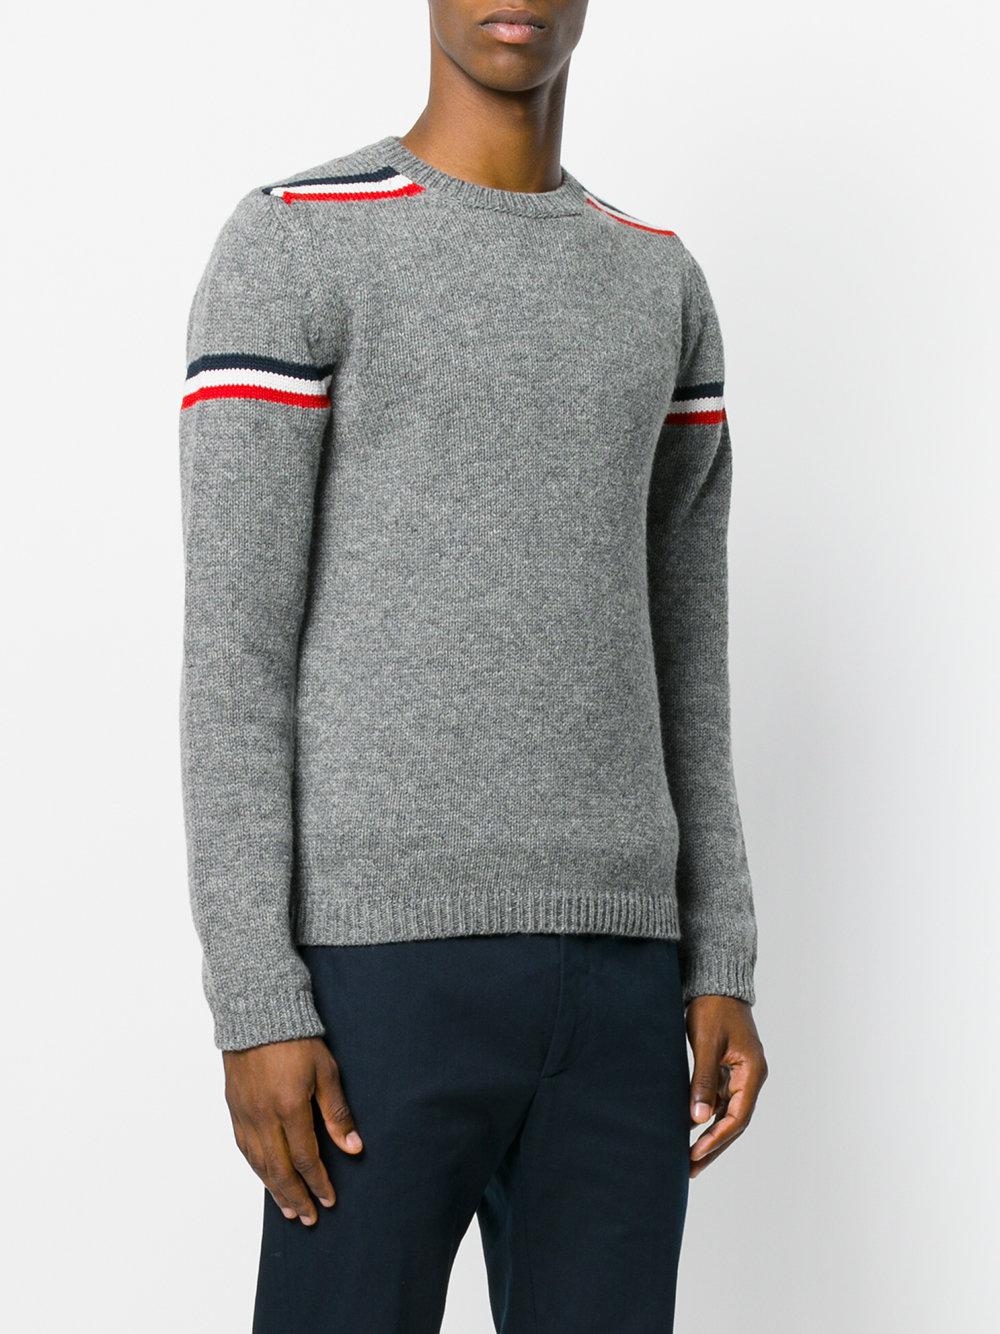 Lyst - Moncler Logo Striped Sweater in Gray for Men